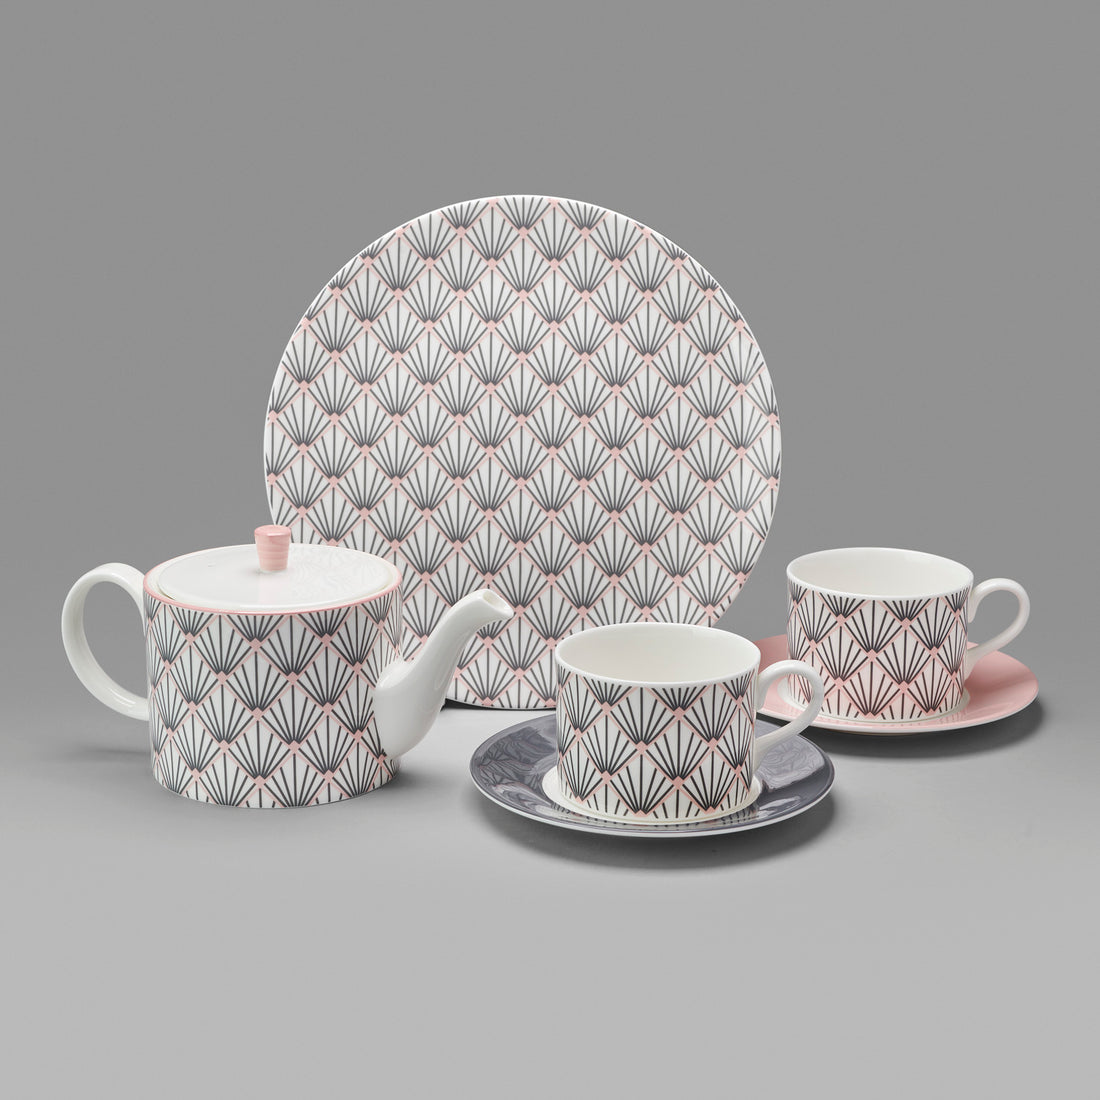 Zighy Teapot in Grey and Blush - 450ml